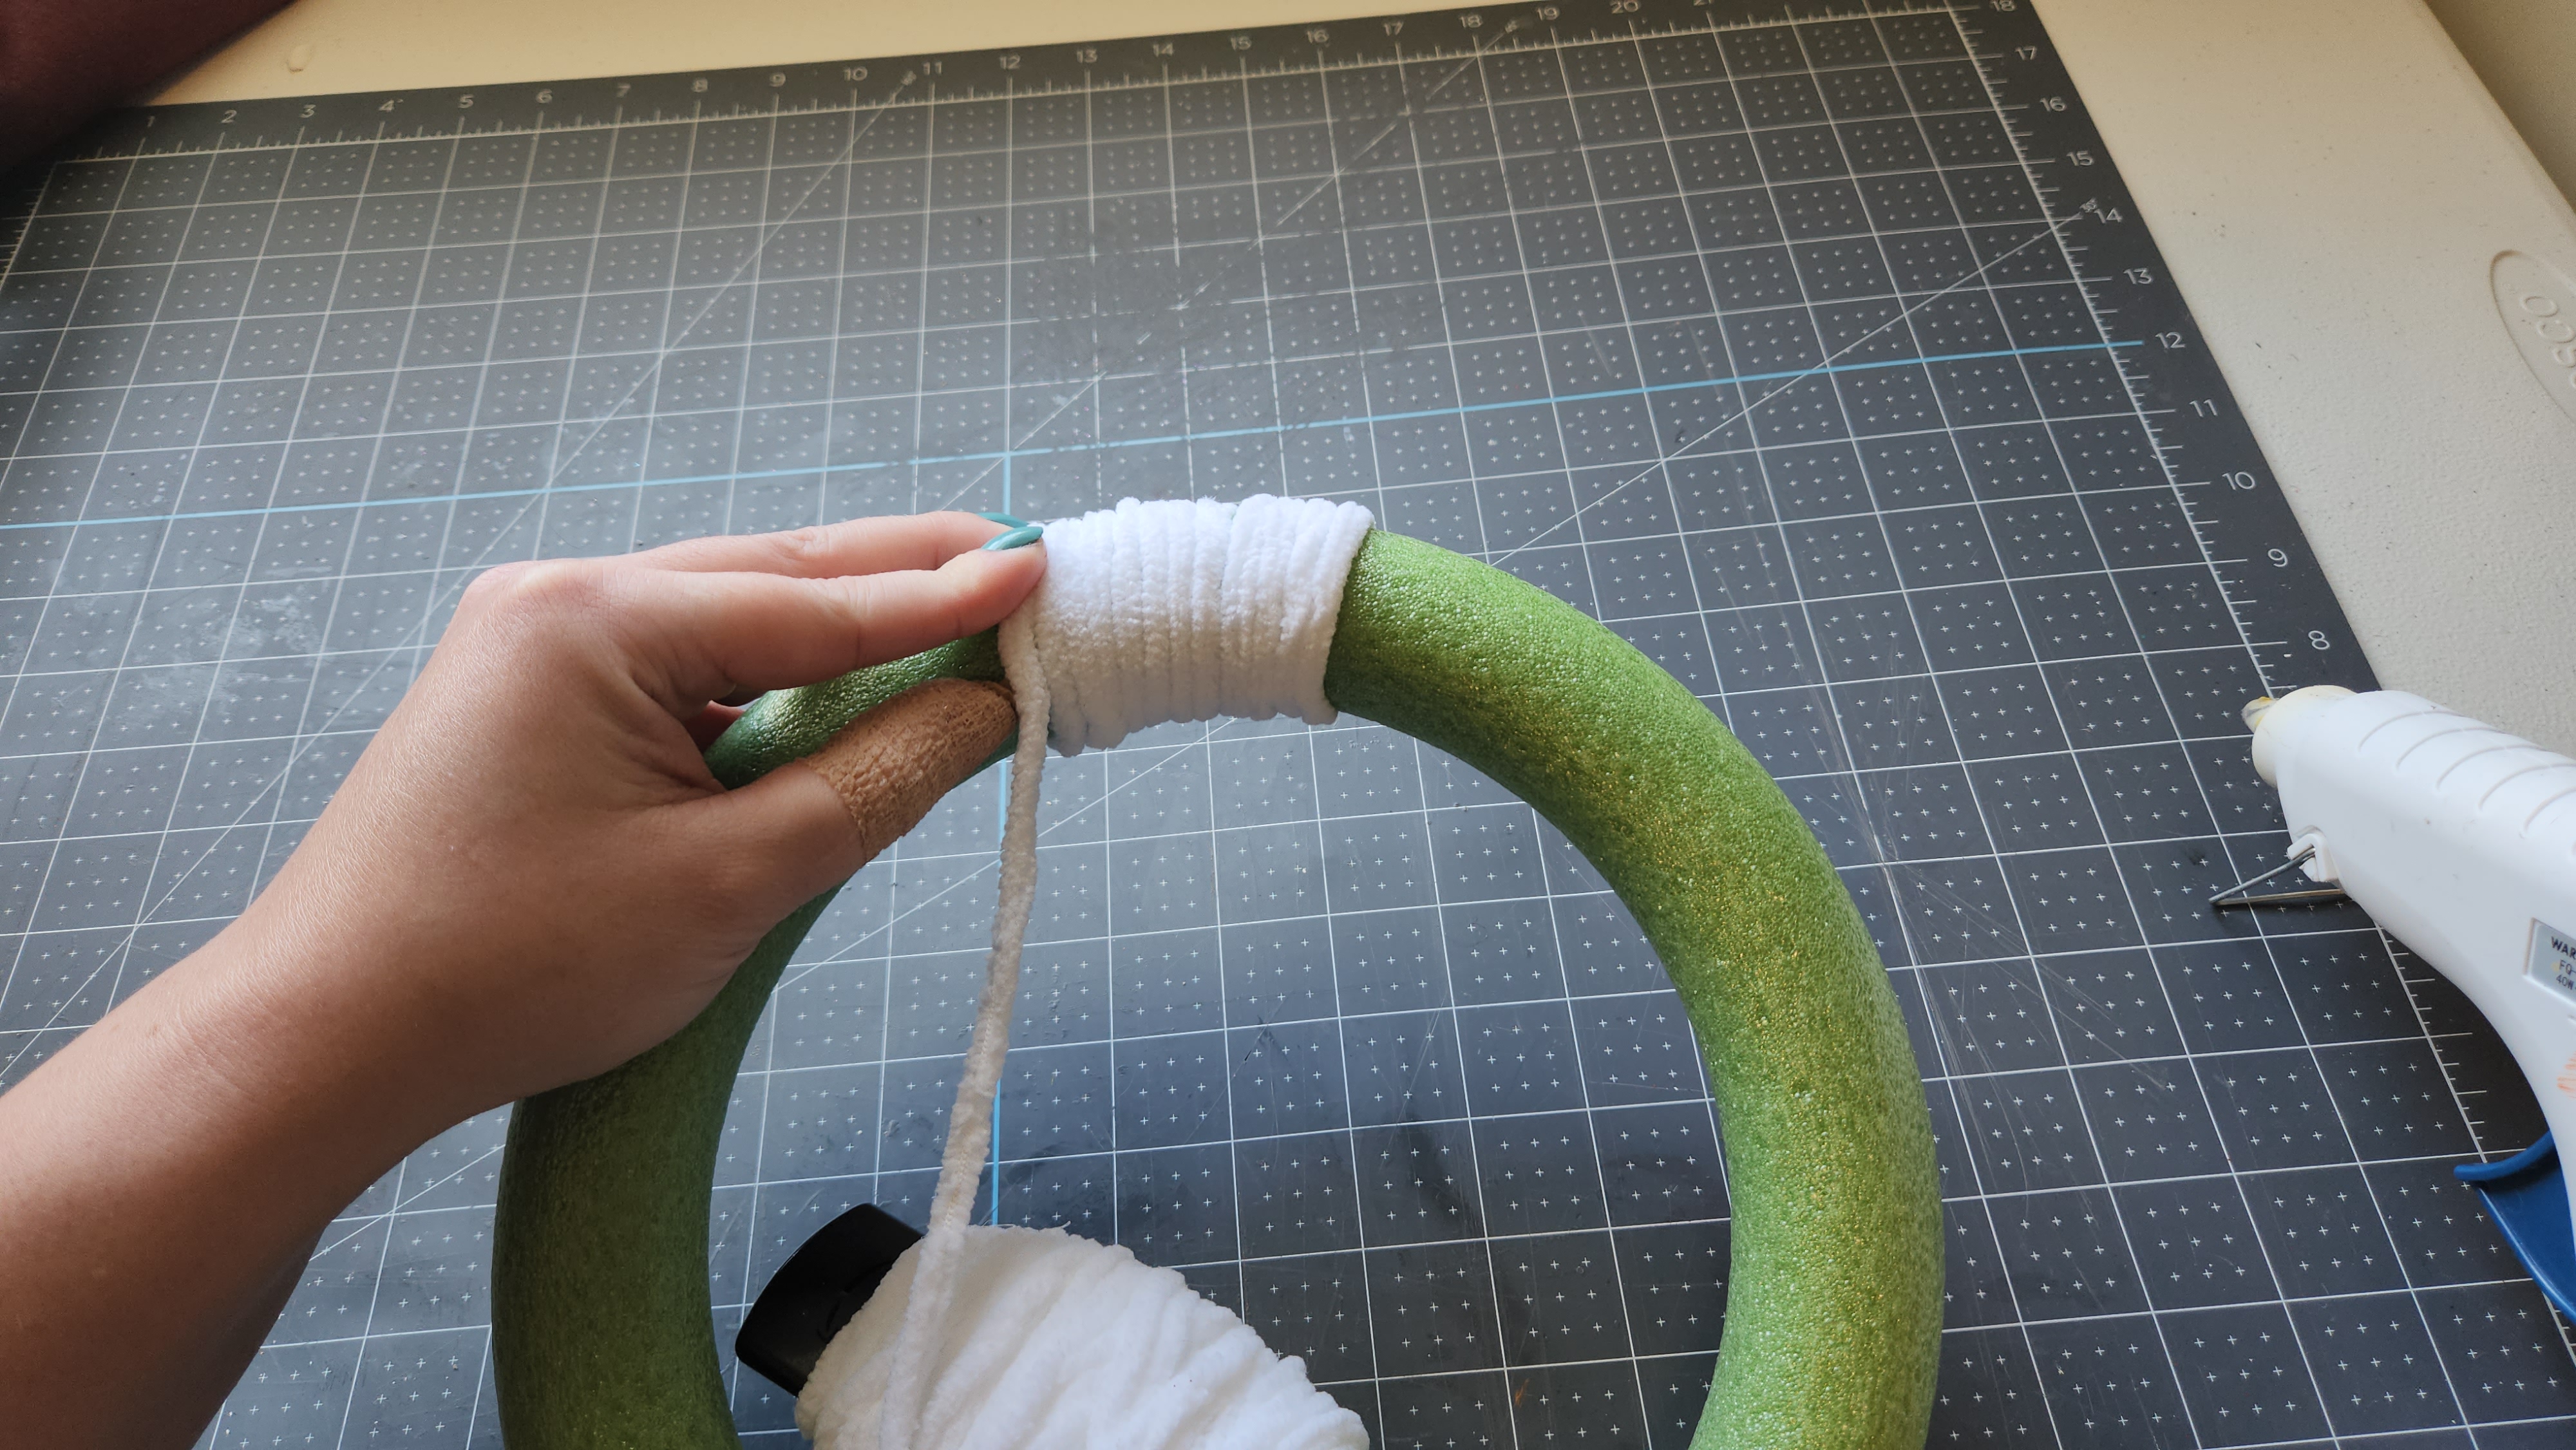 Wrapping the chenille yarn around the wreath form to cover it.